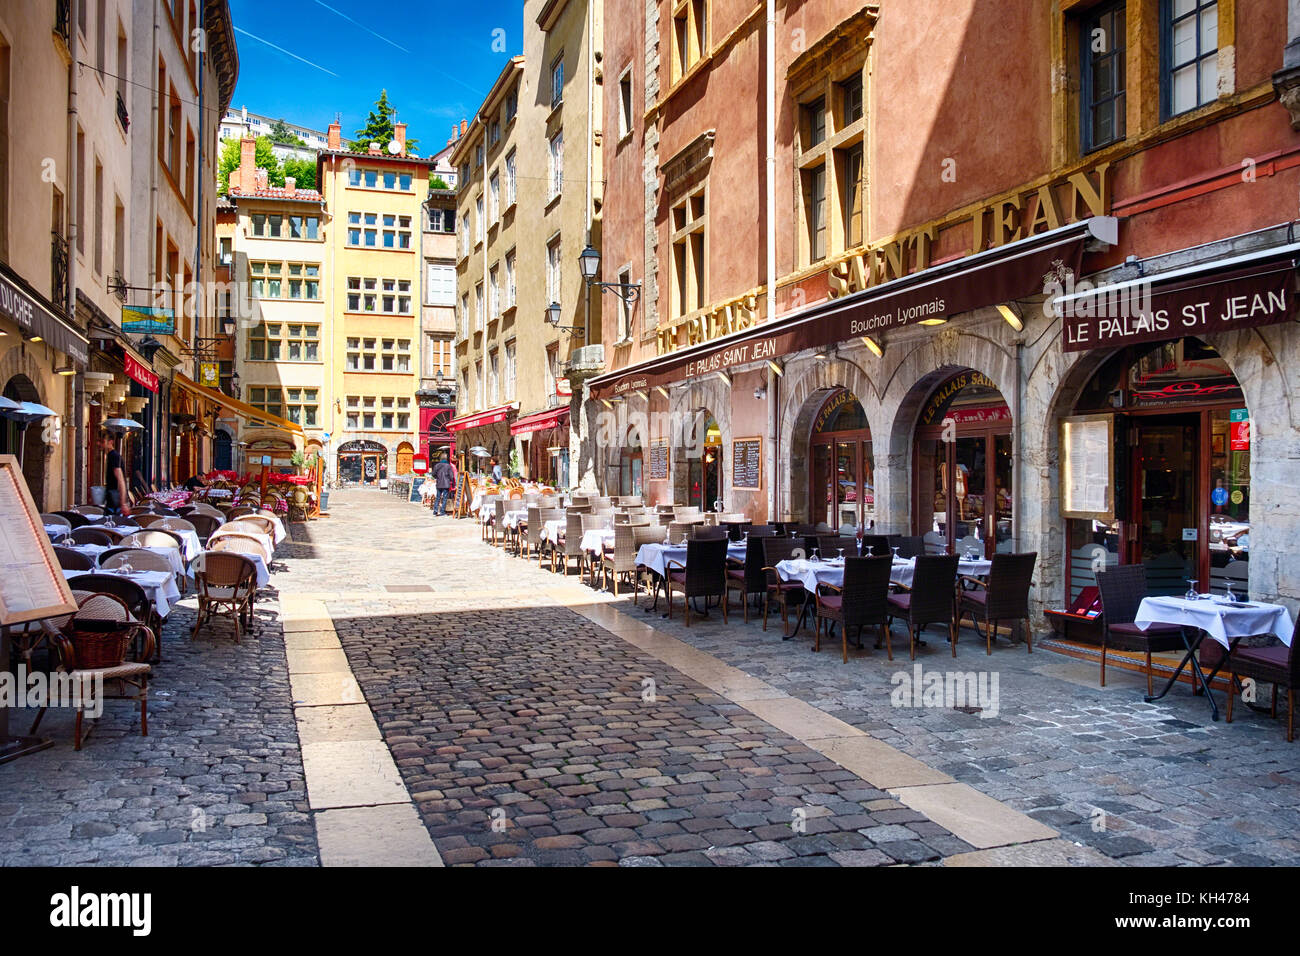 Resataurants in a Cobblestone Street Opening Up for Lunch, Rue St Jean, Old Lyon, Framce Stock Photo